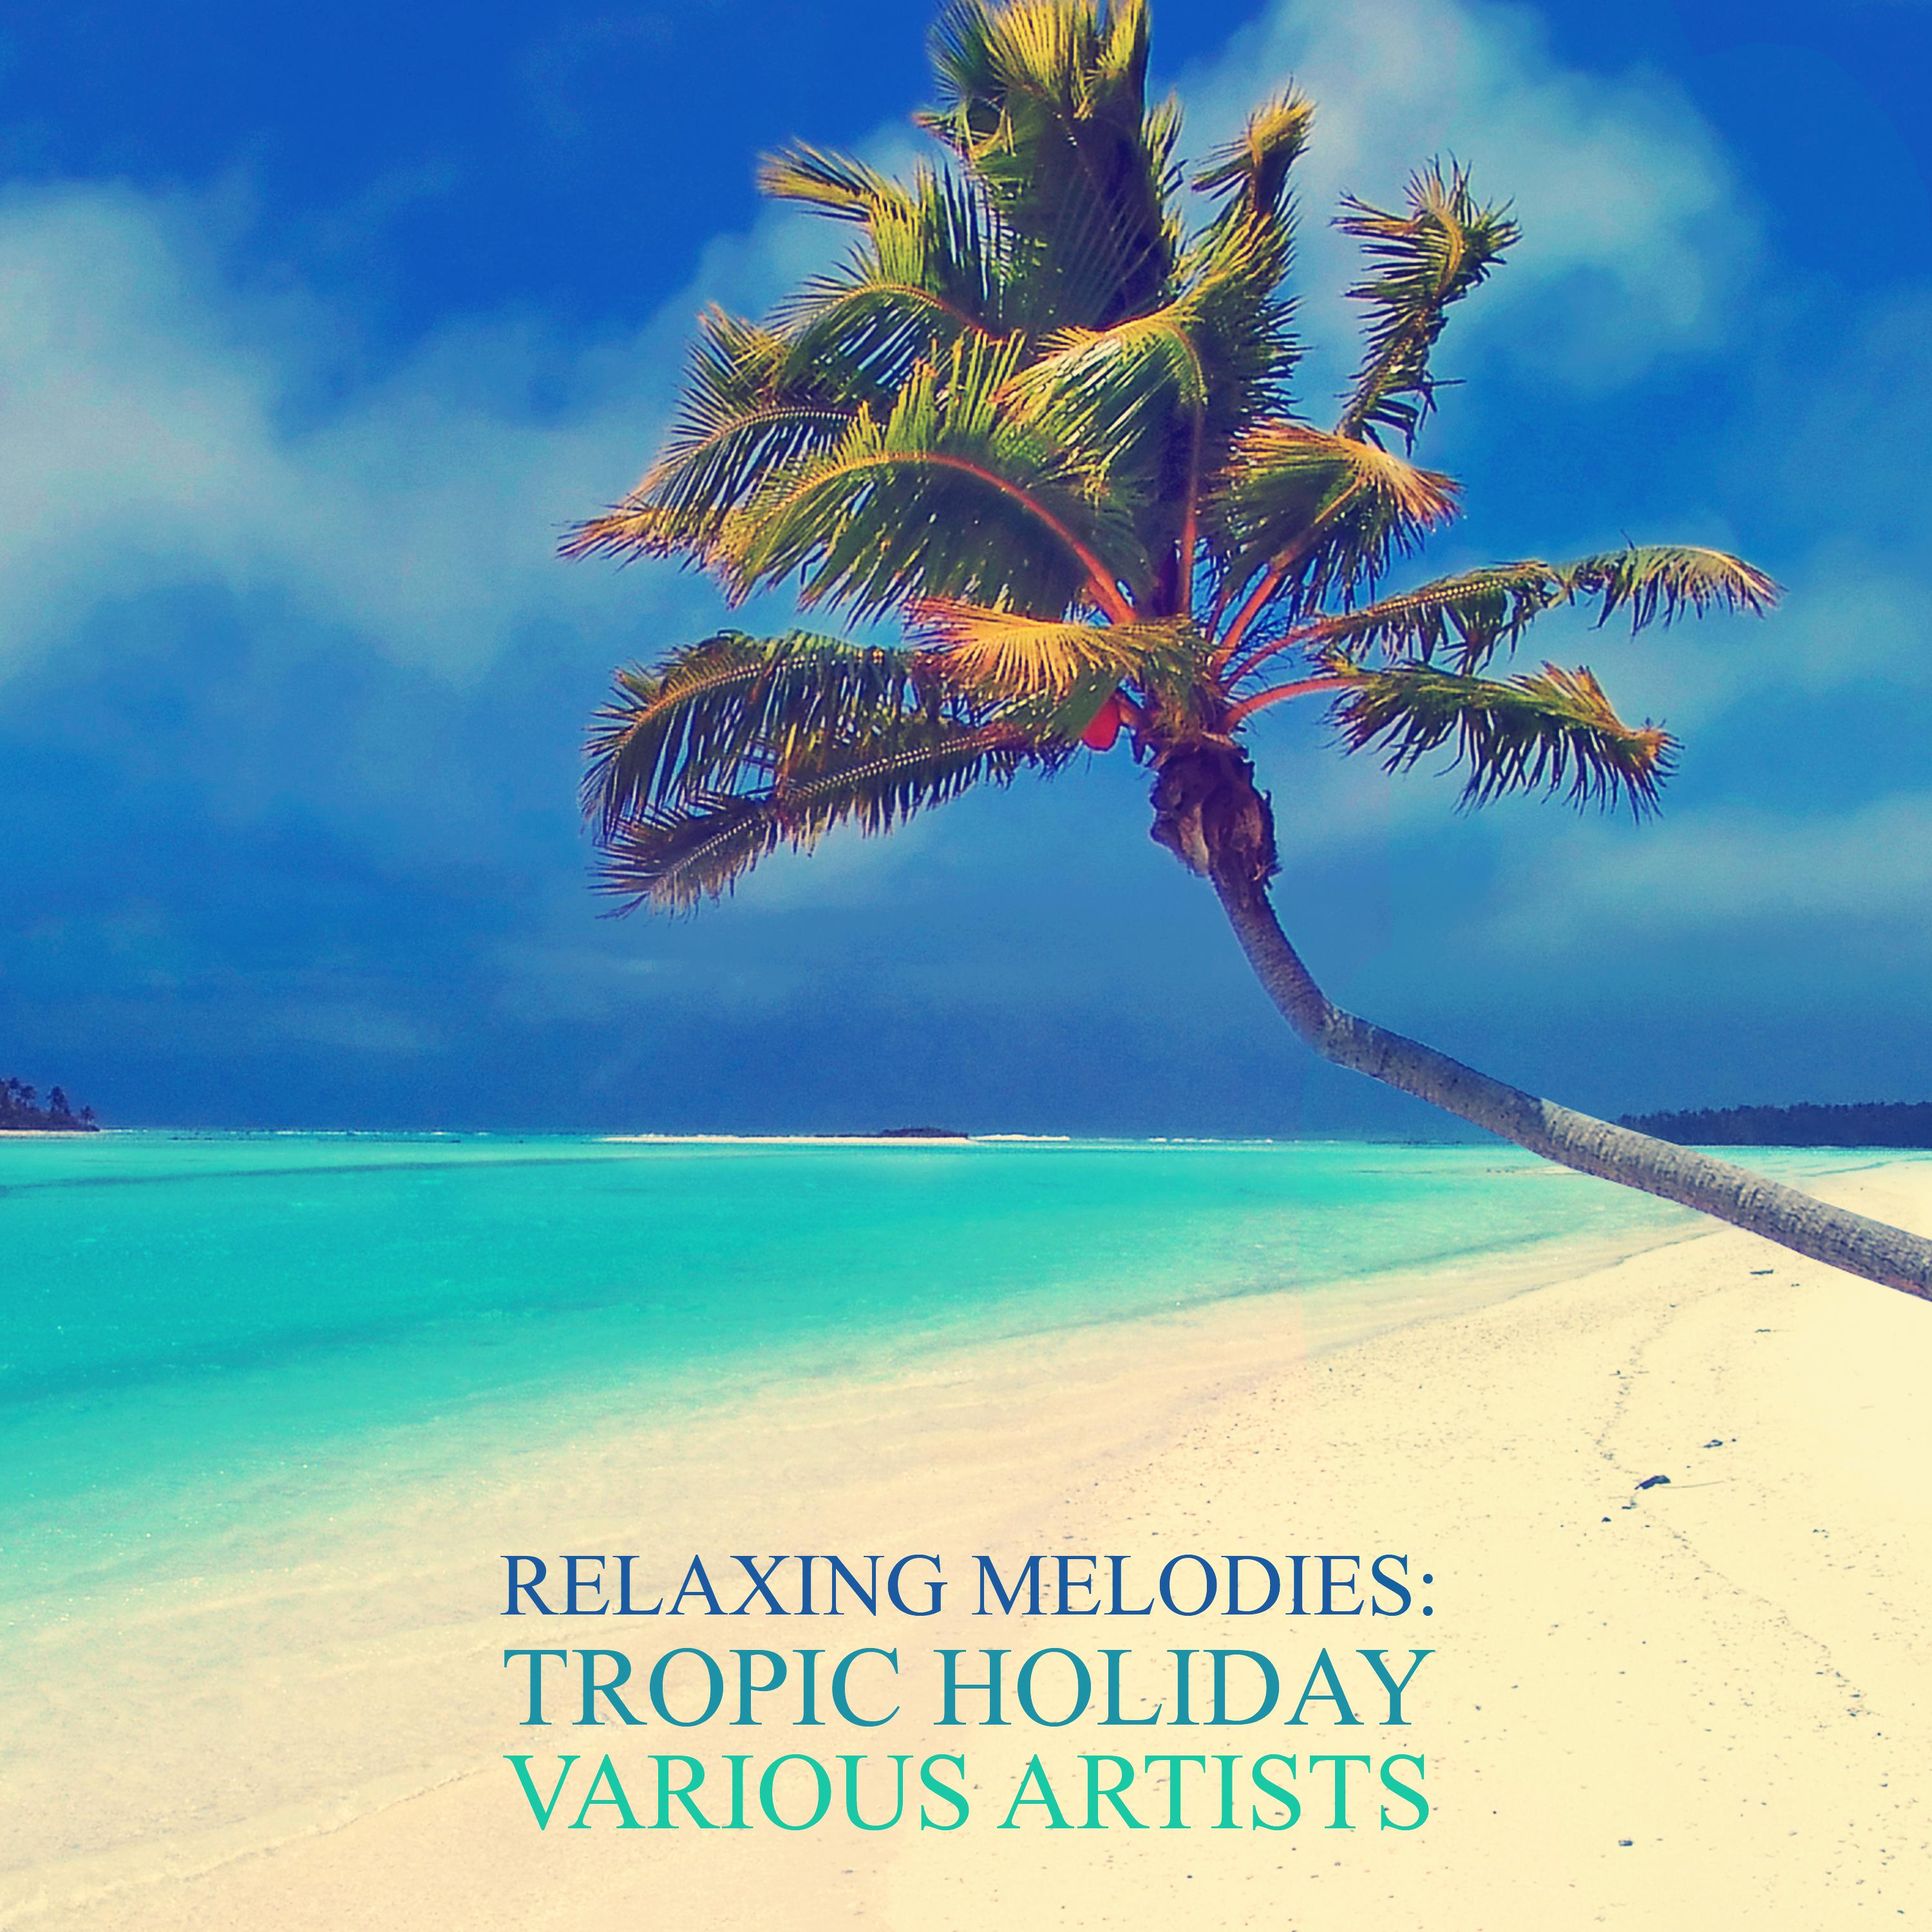 Relaxing Melodies: Tropic Holiday